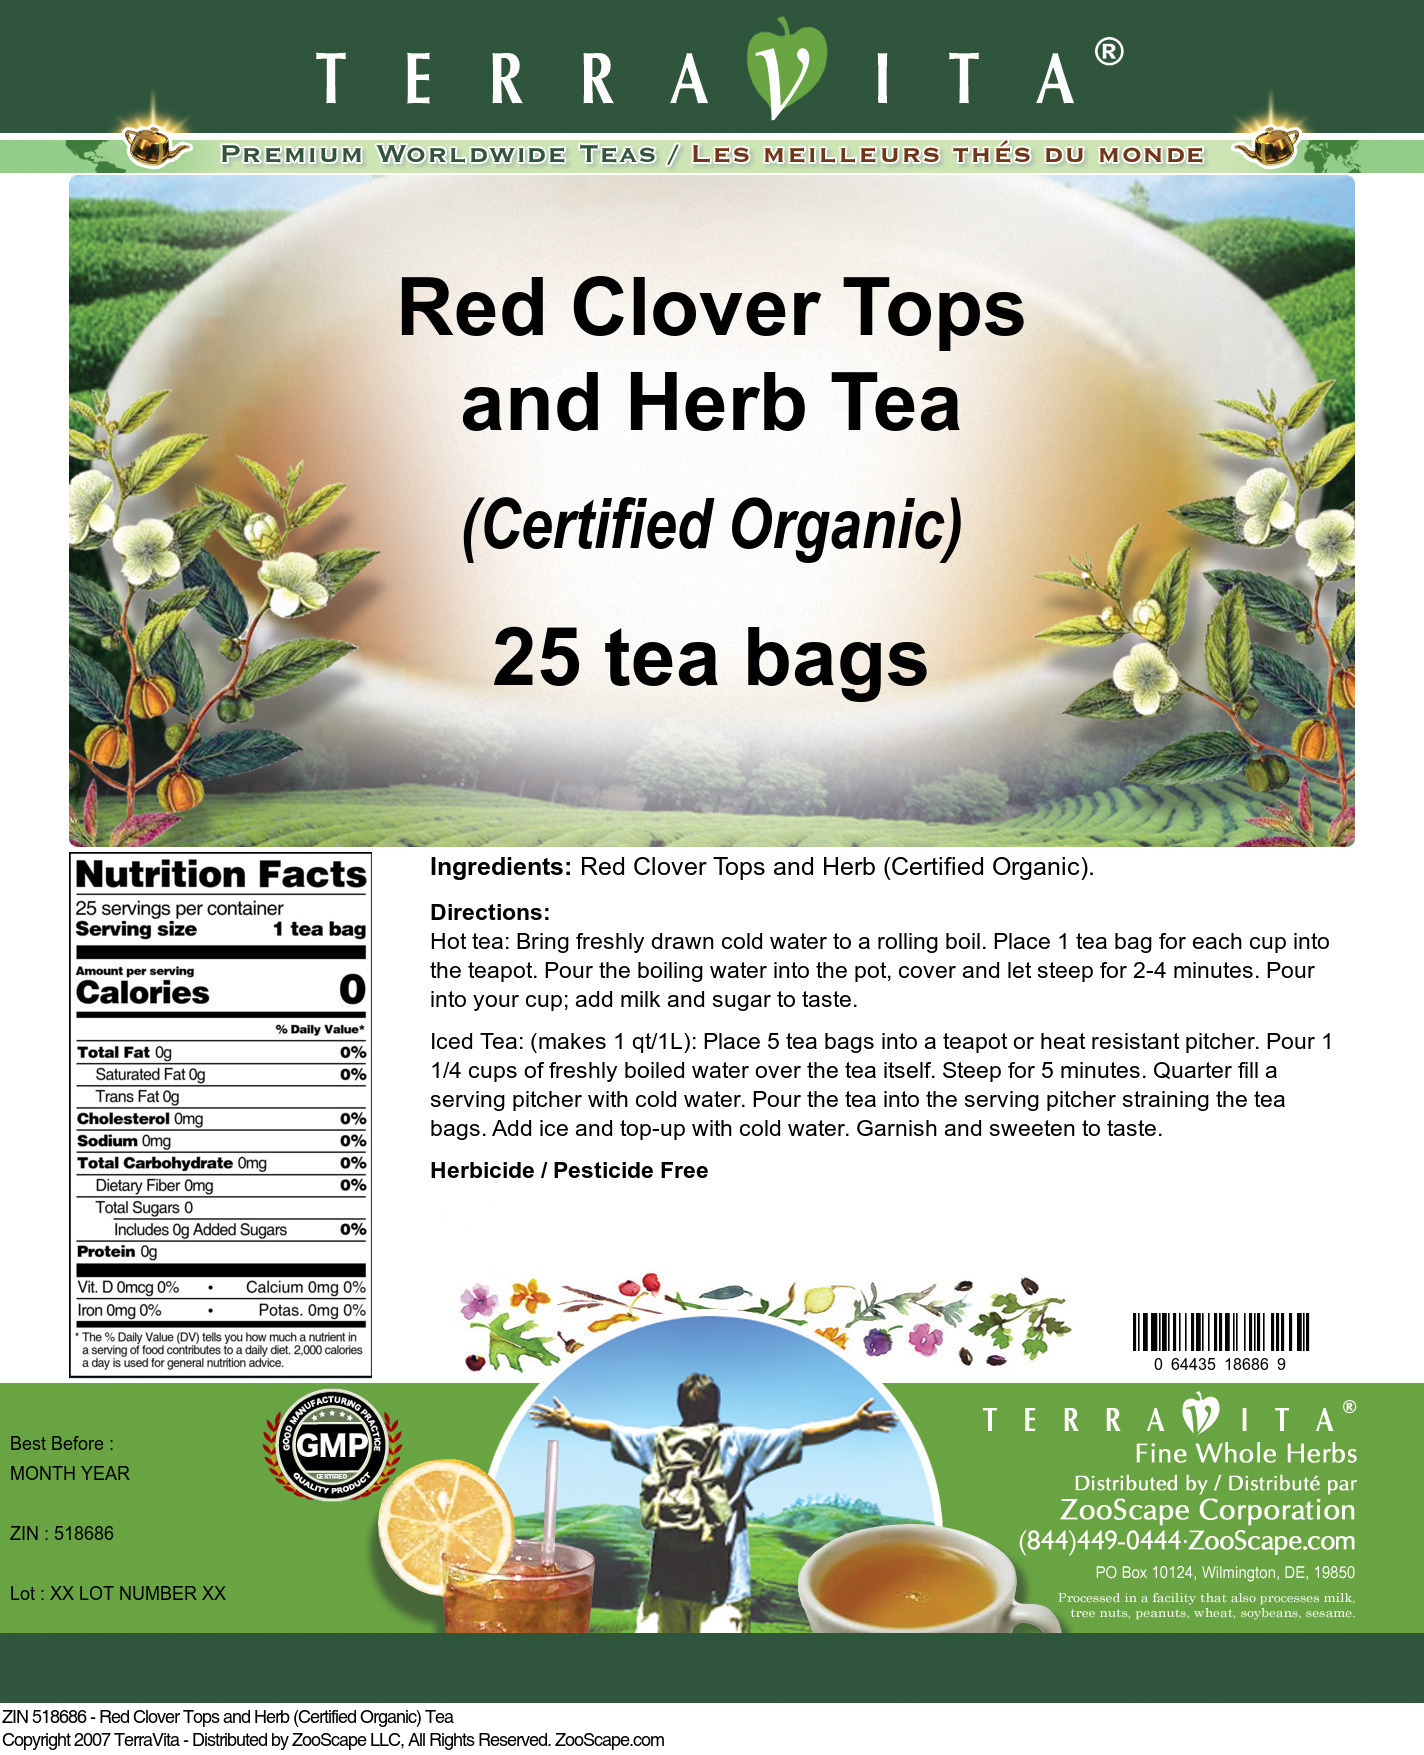 Red Clover Tops and Herb (Certified Organic) Tea - Label